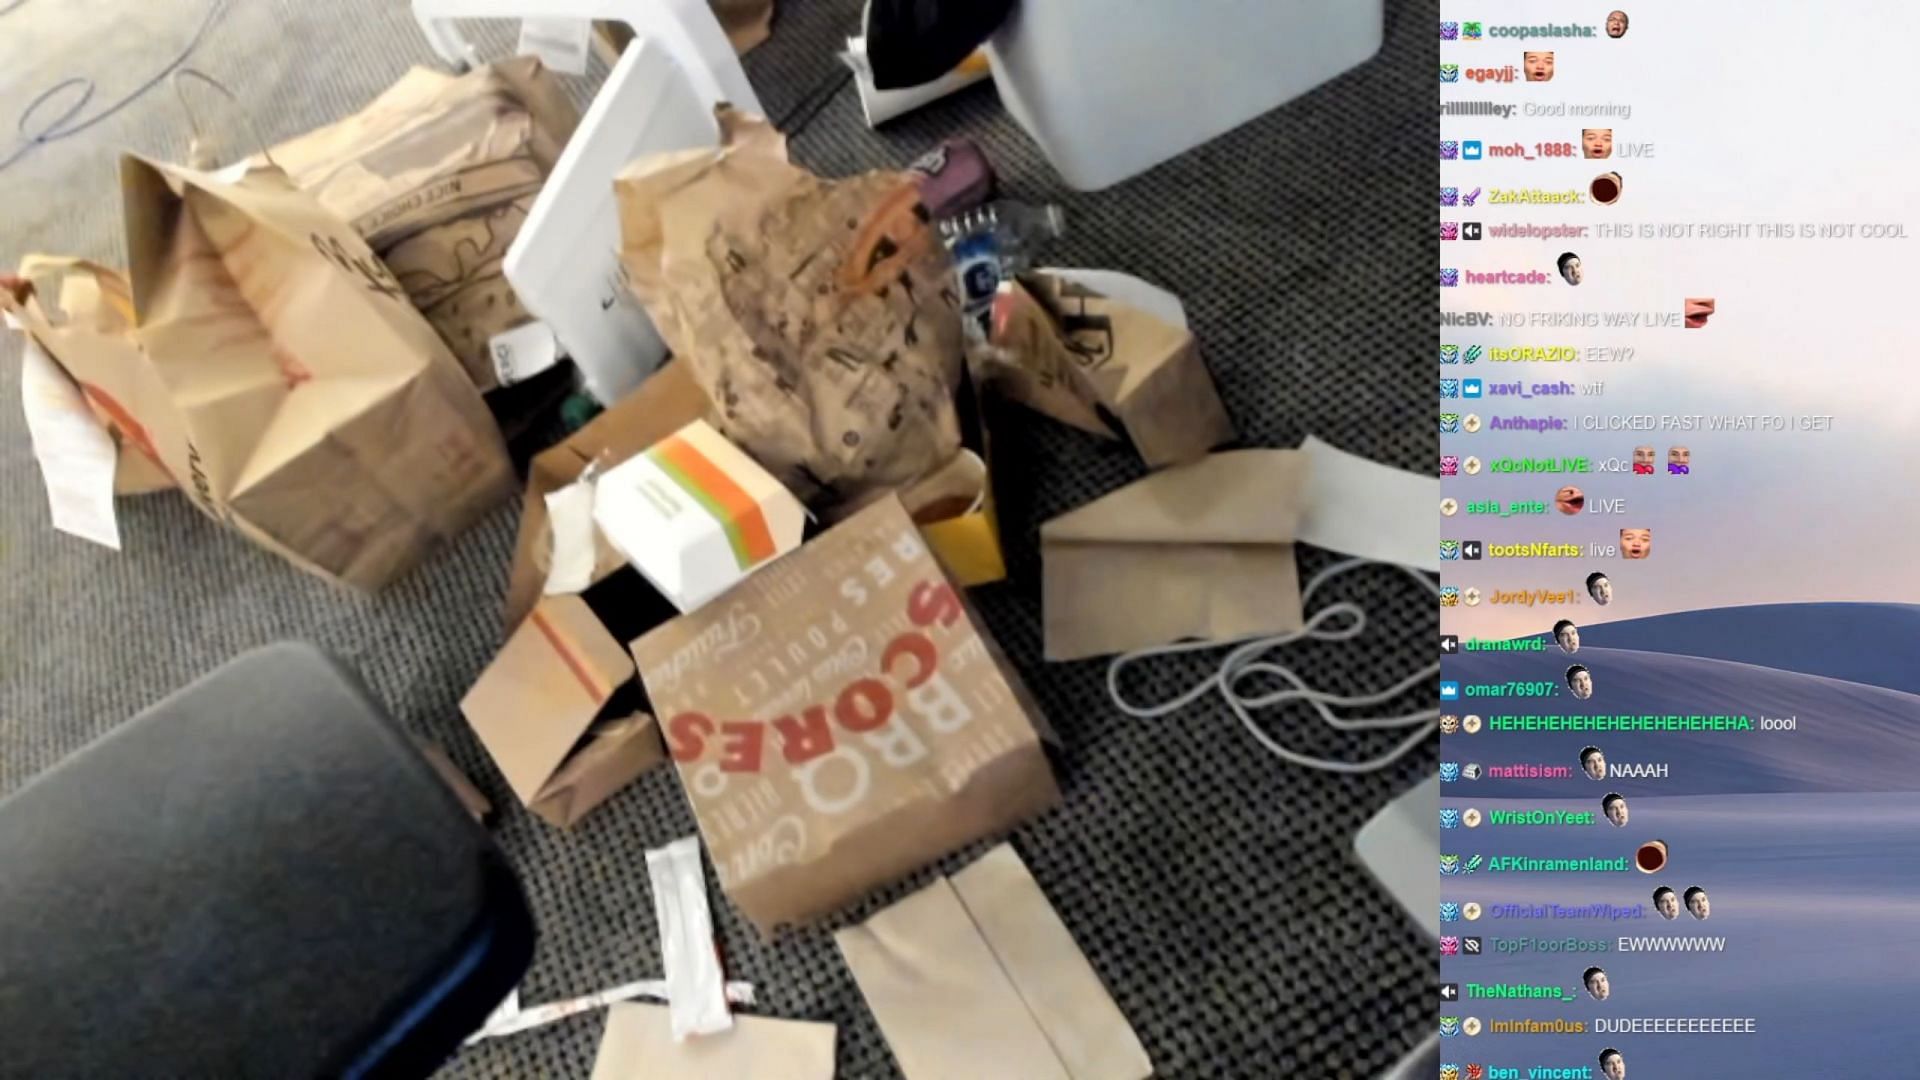 Felix shows off the mess in his new living space, and fans in the Twitch chat express a wide range of reactions (Image via Twitch)